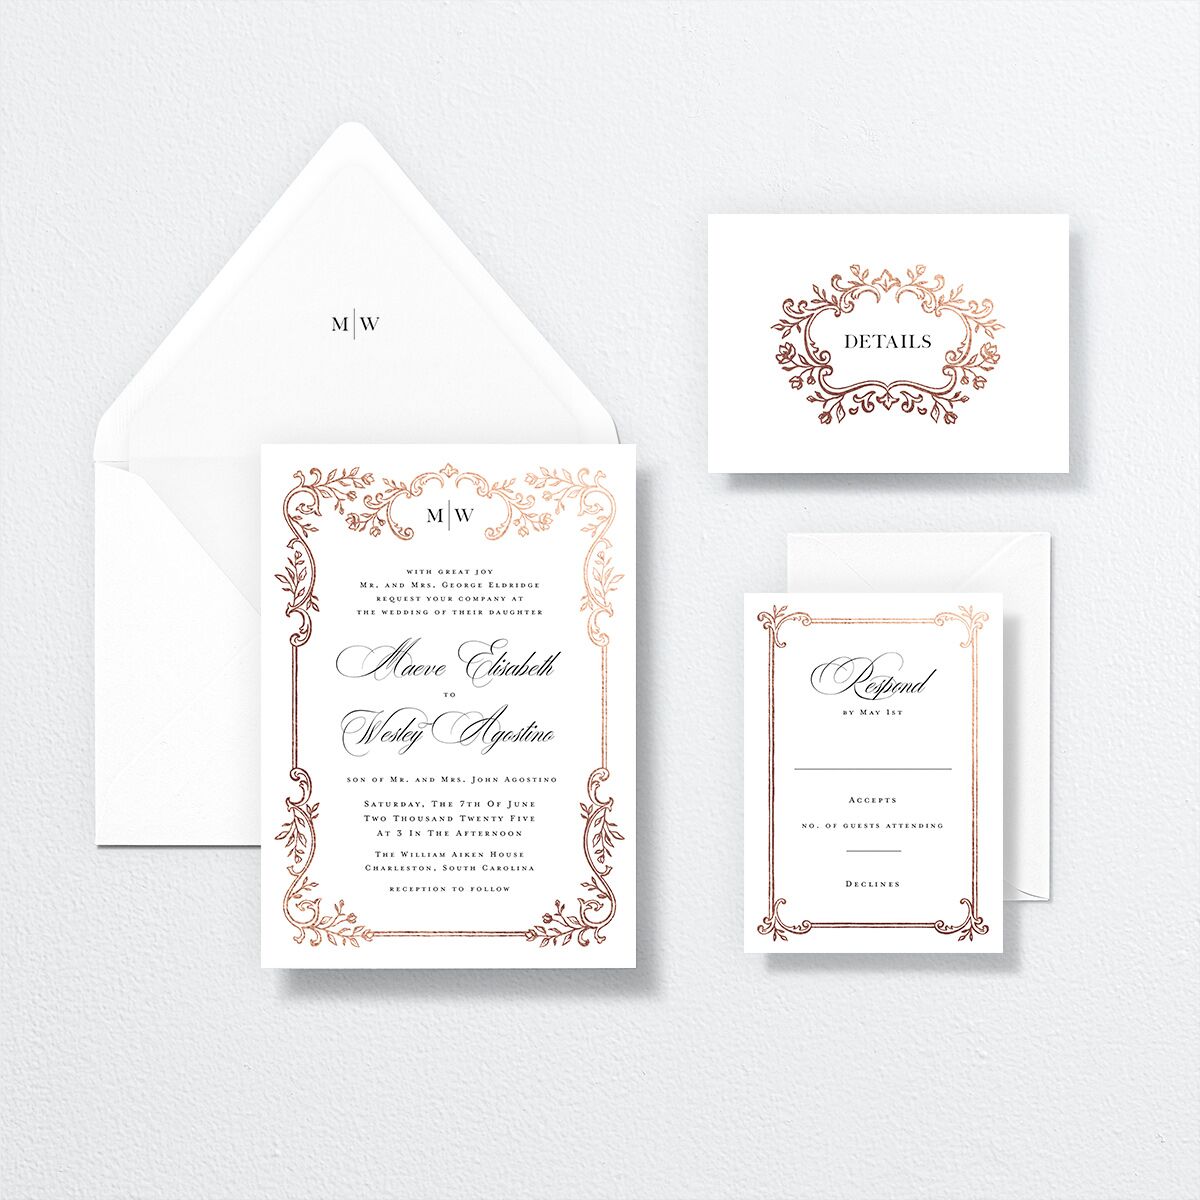 Opulences Wedding Invitations by Vera Wang suite in white